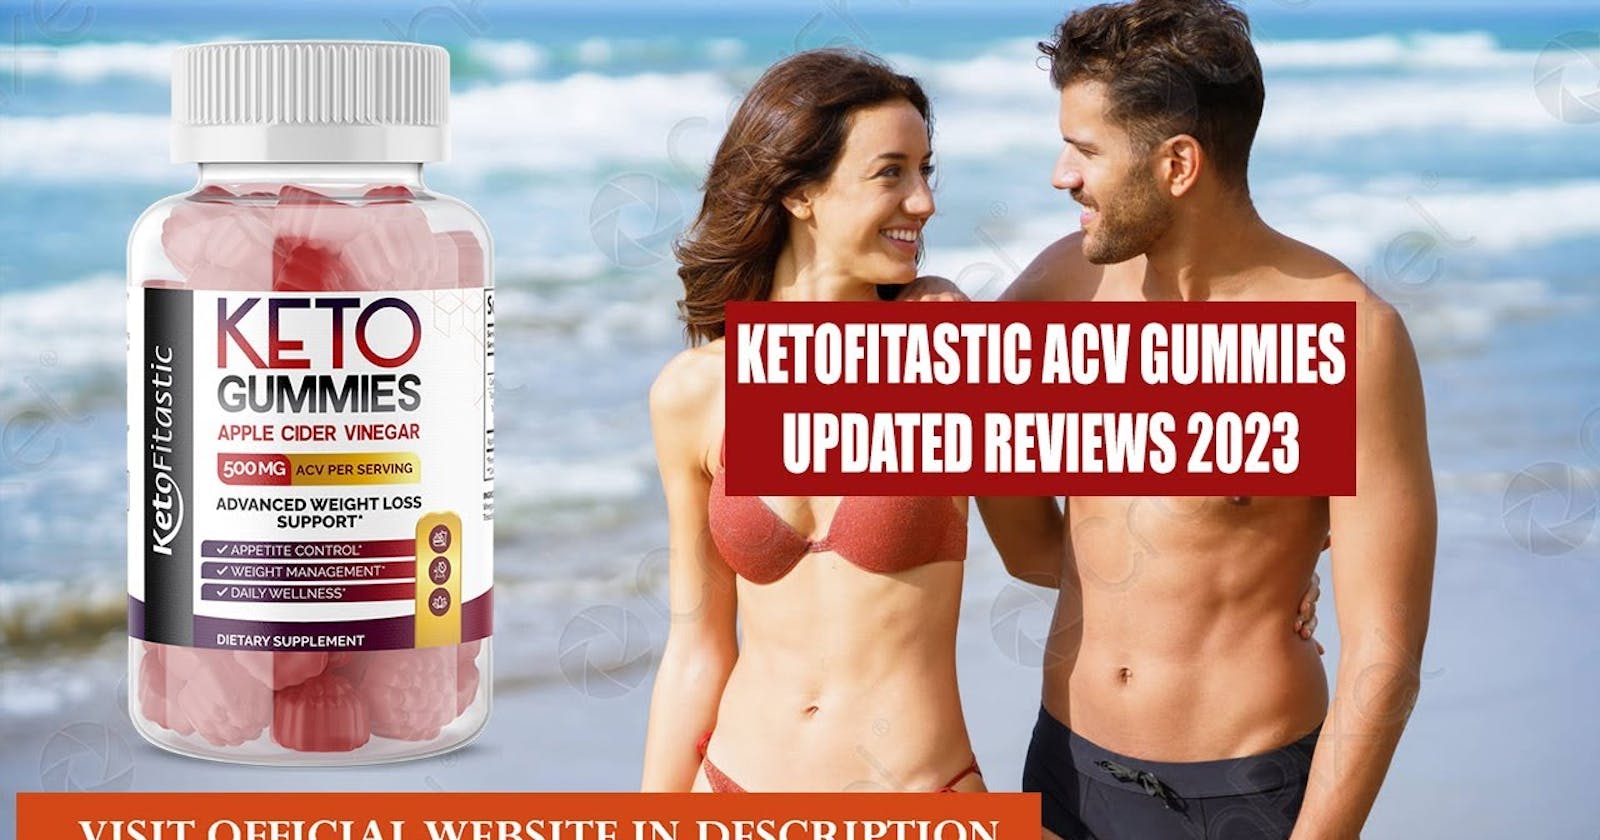 Enjoy the Benefits of a Keto Diet with Easy-to-Take Keto Fitastic Gummies!